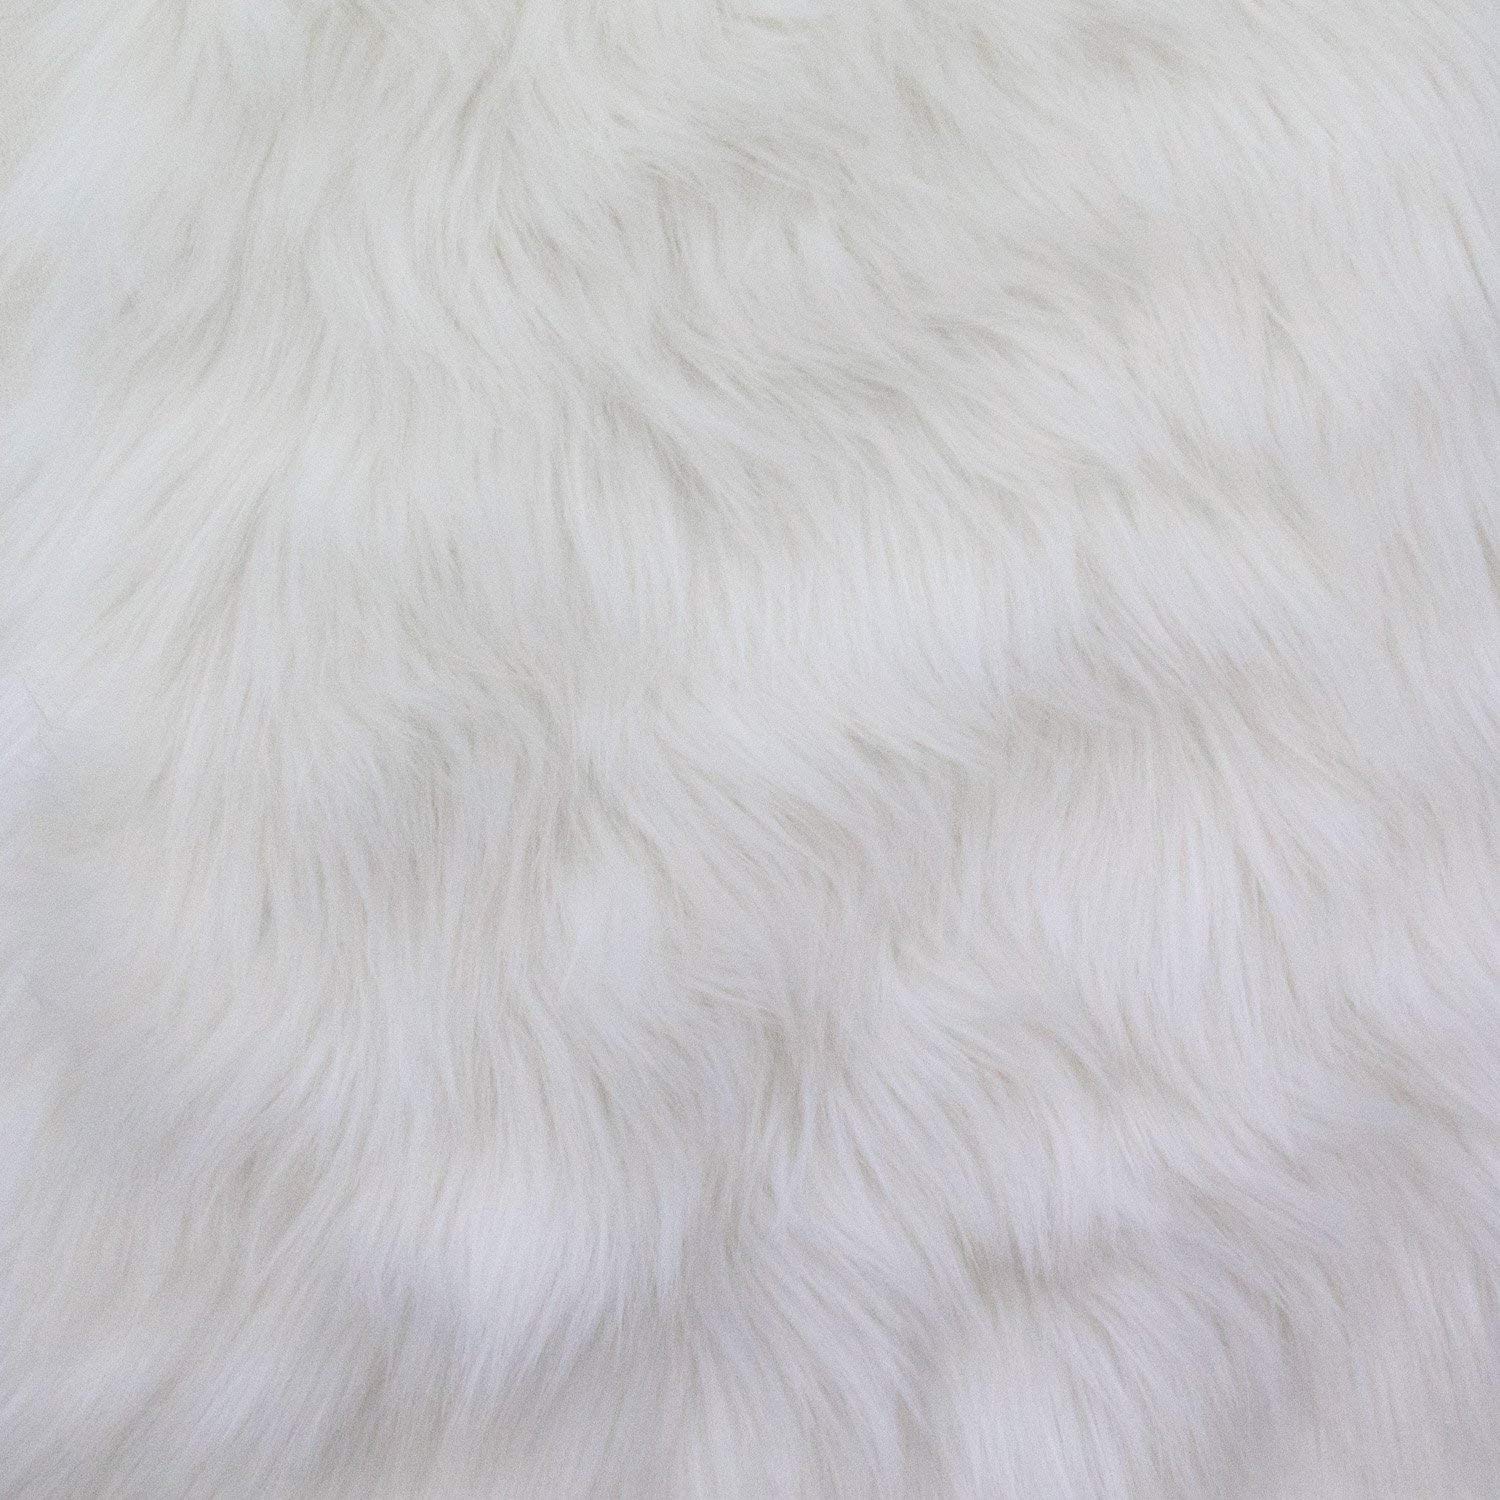 Amazon.com: Faux Fur Luxury Shag White 60 Inch Wide Fabric By the ...